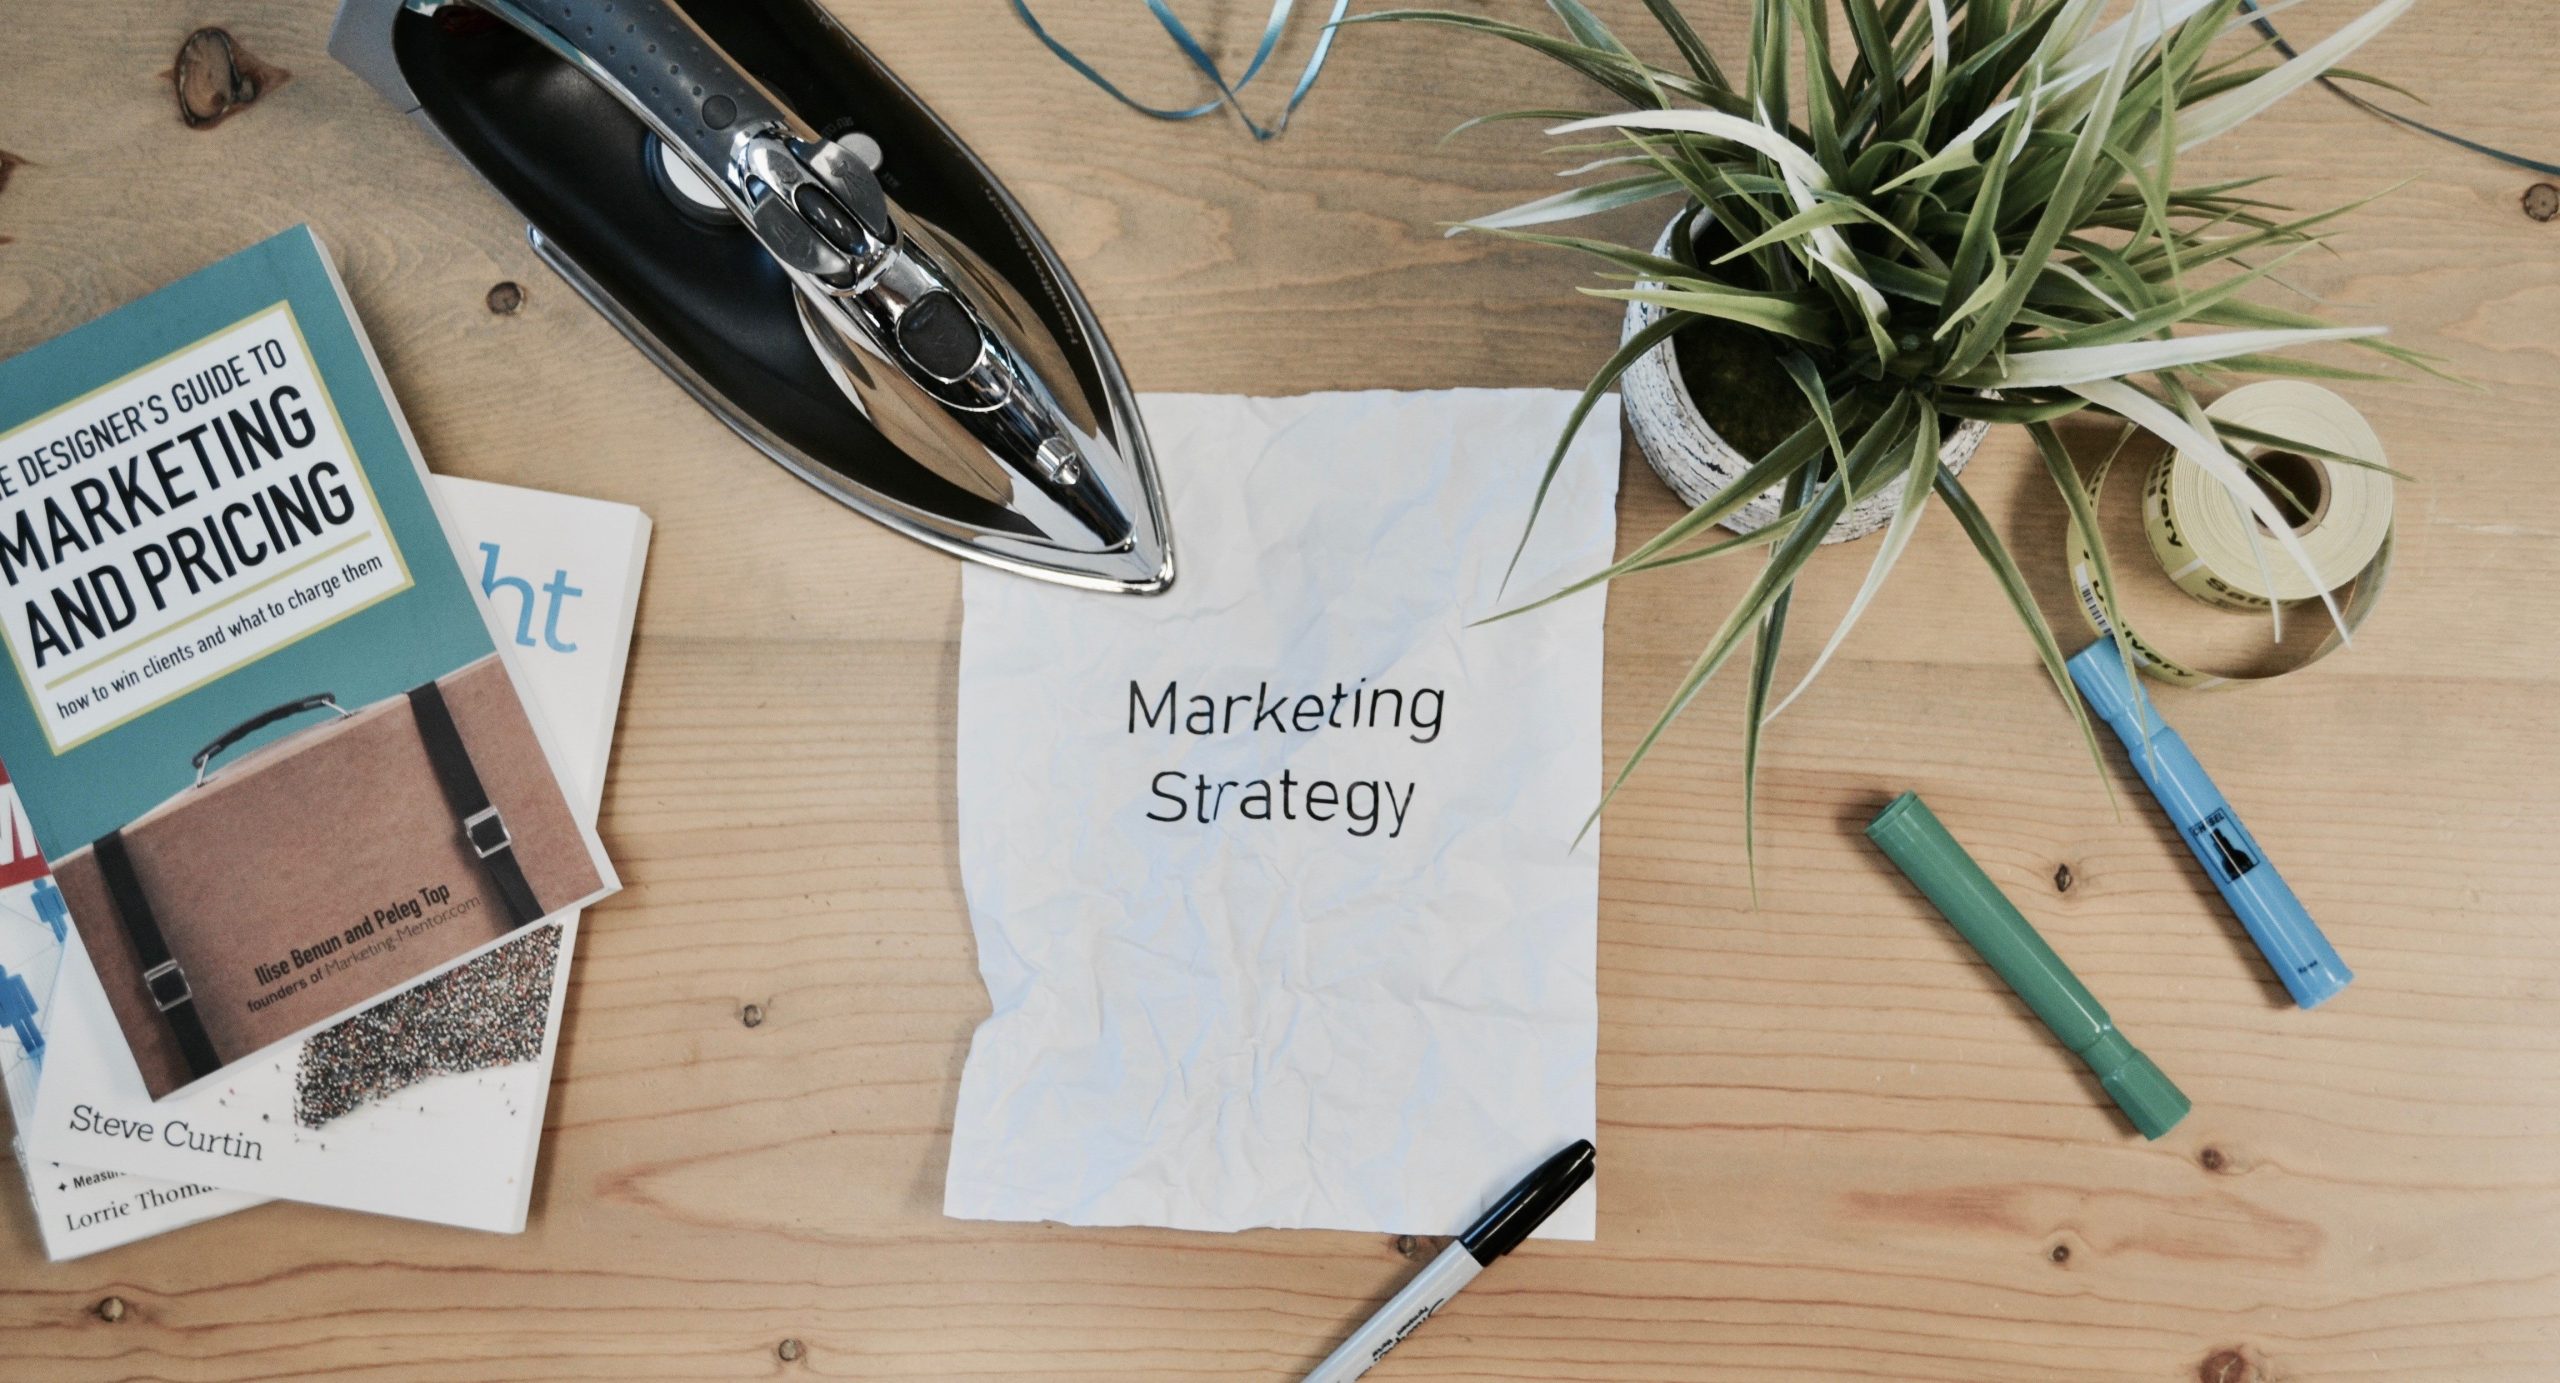 The words 'Marketing Strategy' written on a crumpled piece of paper on a desk.